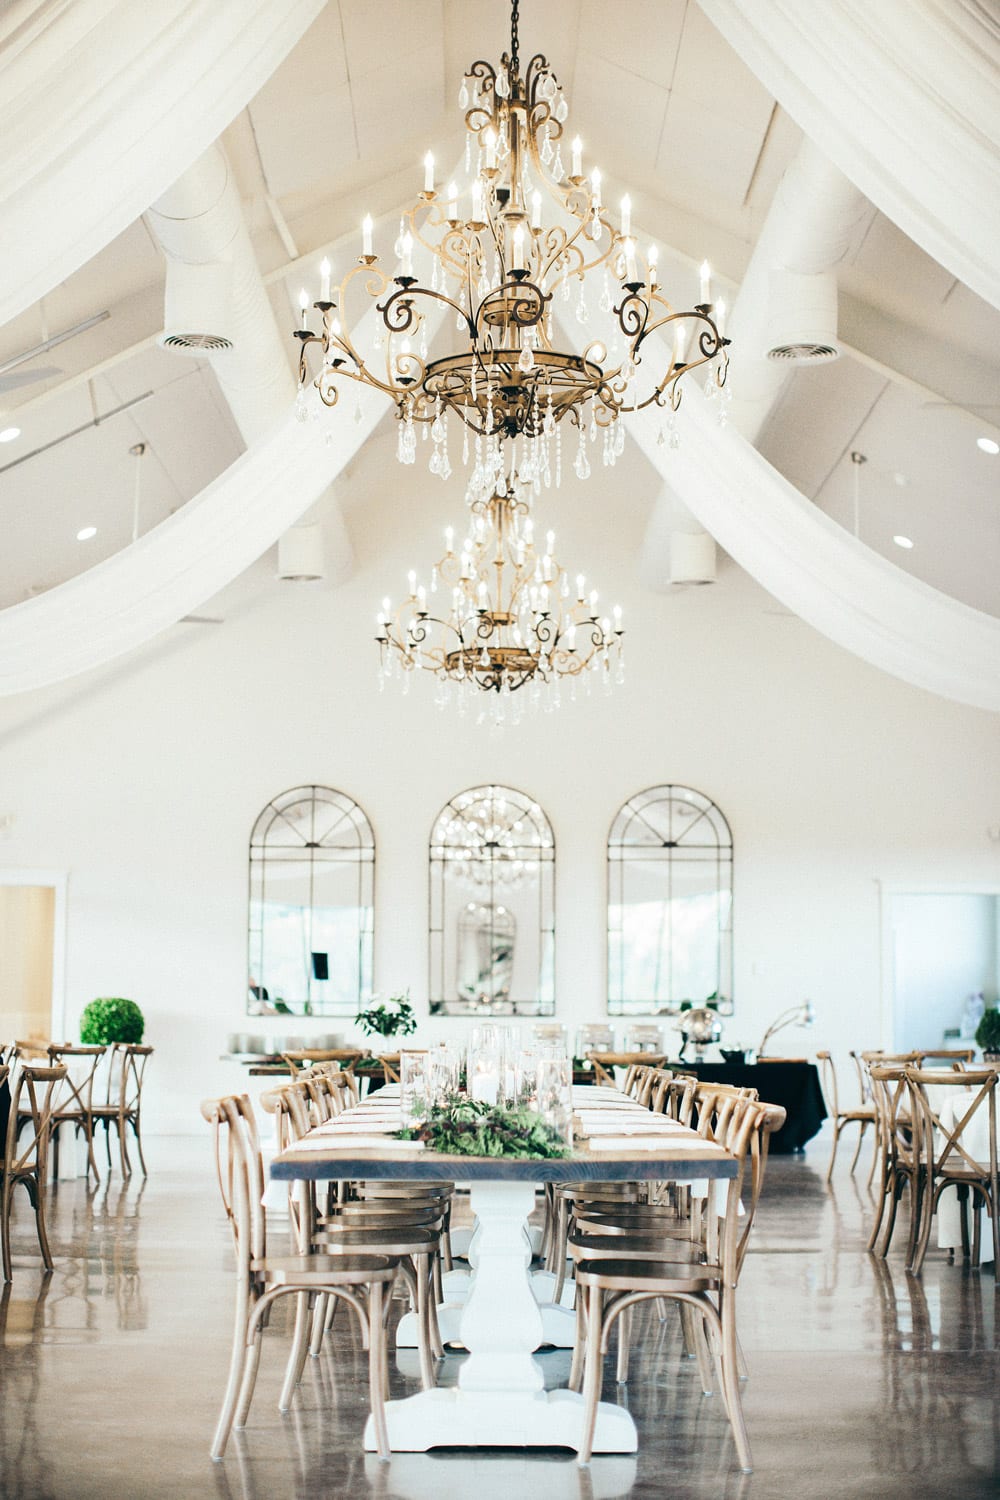 Dinner table and chandeliers